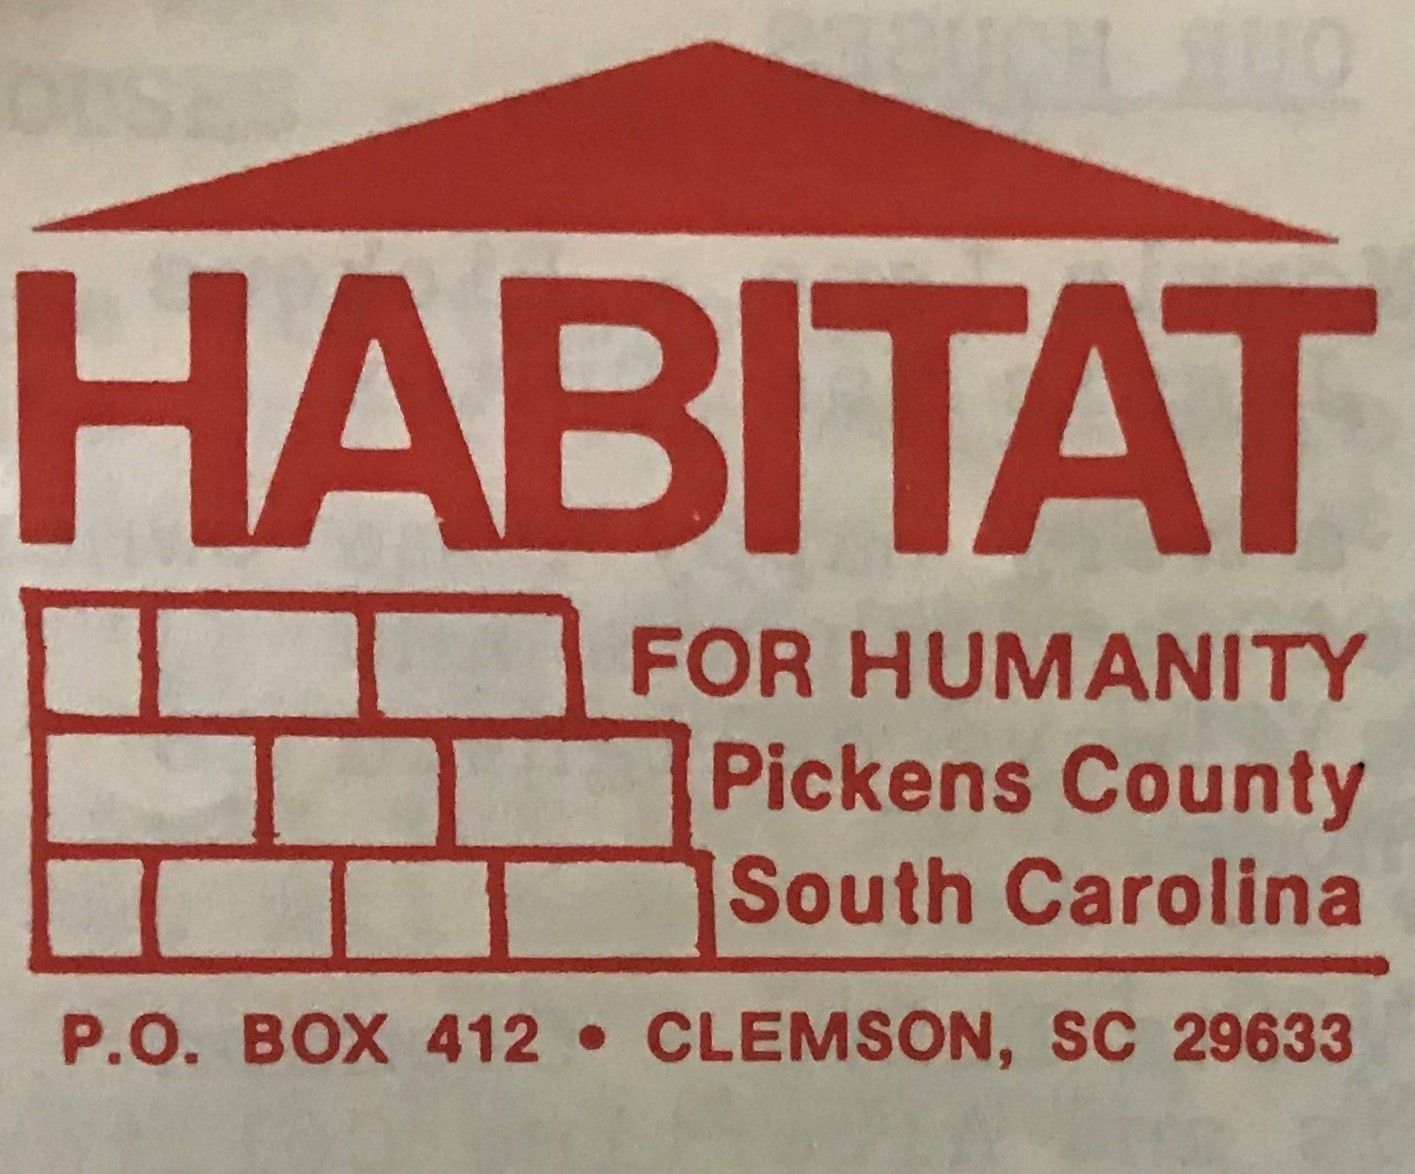 Pickens County Habitat for Humanity early logo in red